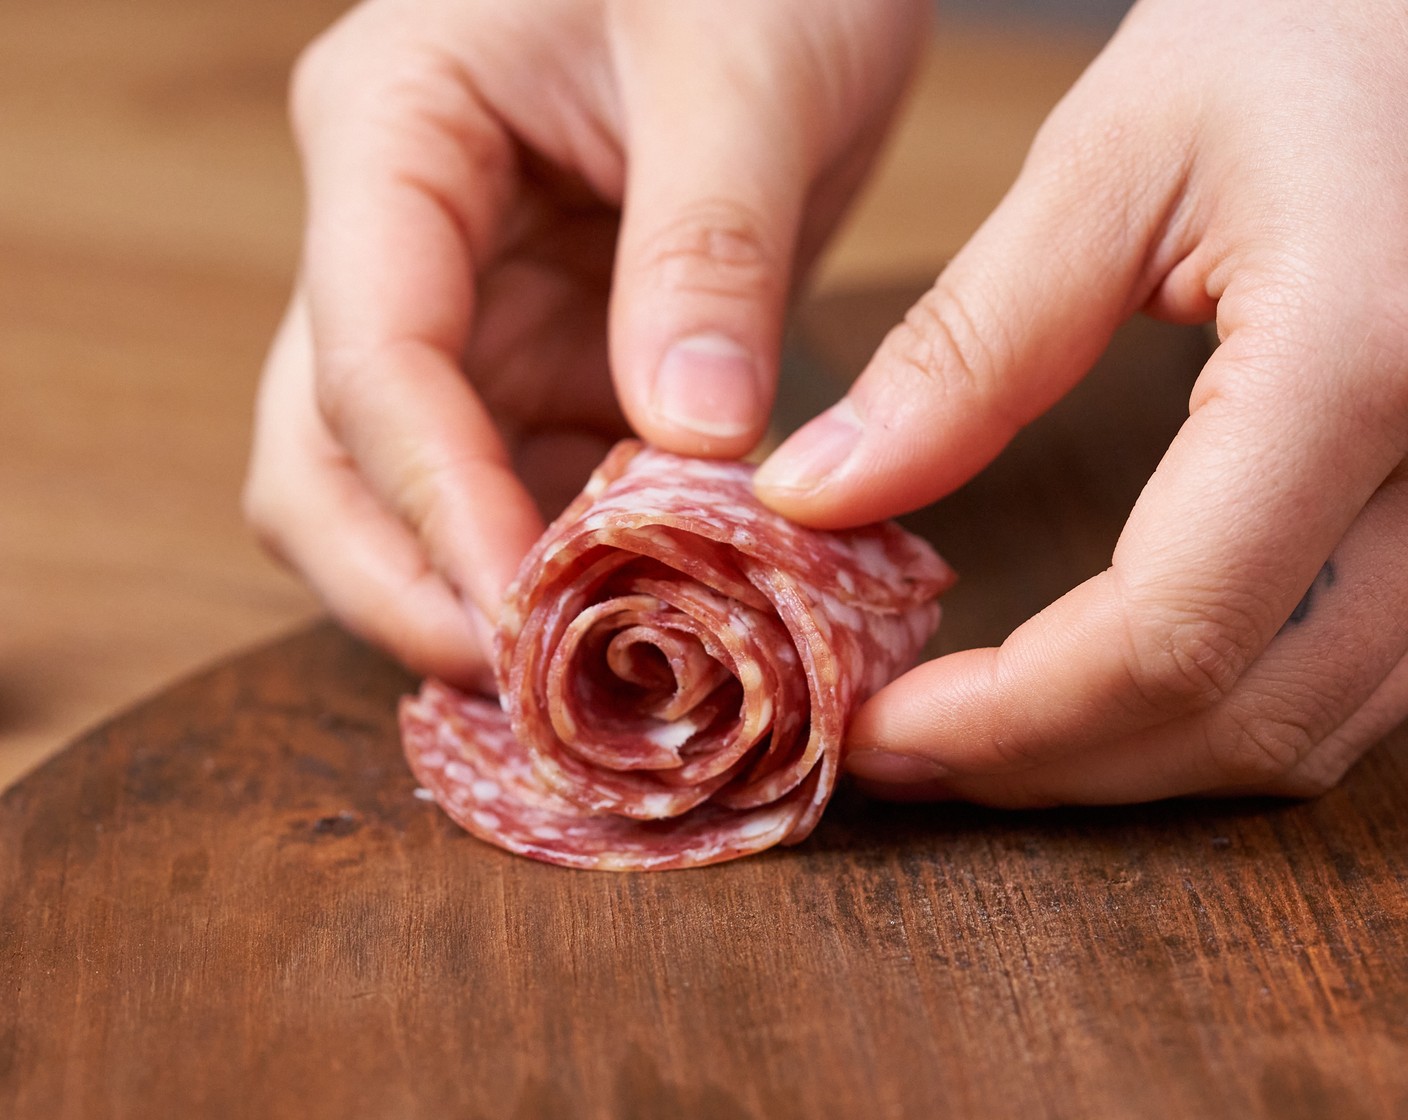 step 2 Make the salami rose by layering 5-6 pieces of Salami (1/2 cup) on the surface, and make sure 1/3 or 1/2 of each piece is overlapping with another piece. Fold the salami pieces in half and roll them up from left to right, making a flower shape. Set aside.